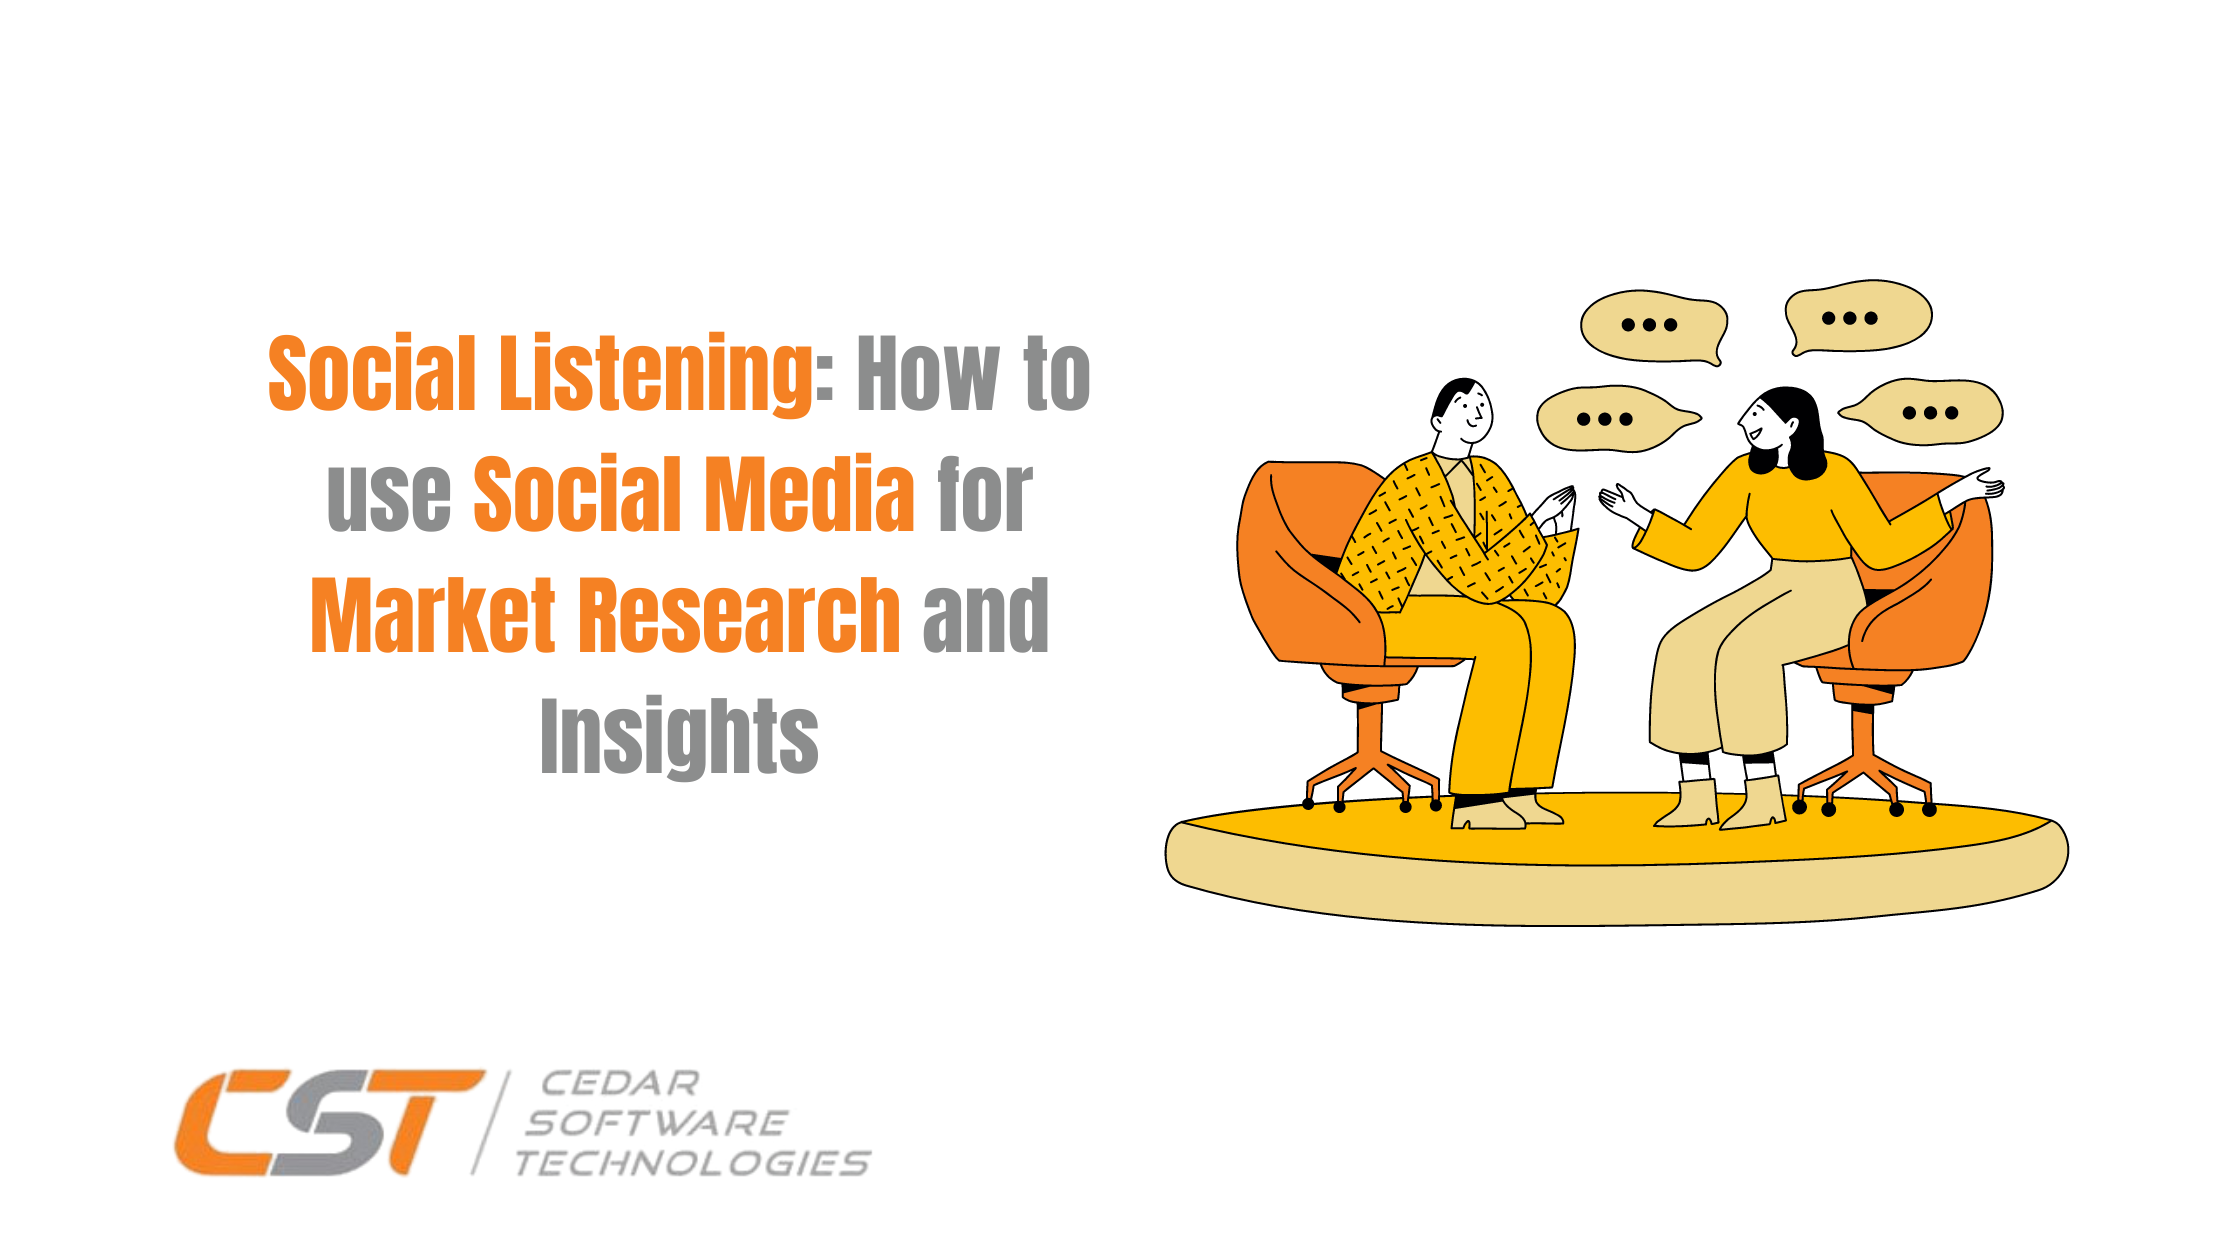 Social Listening: How to use Social Media for Market Research and Insights